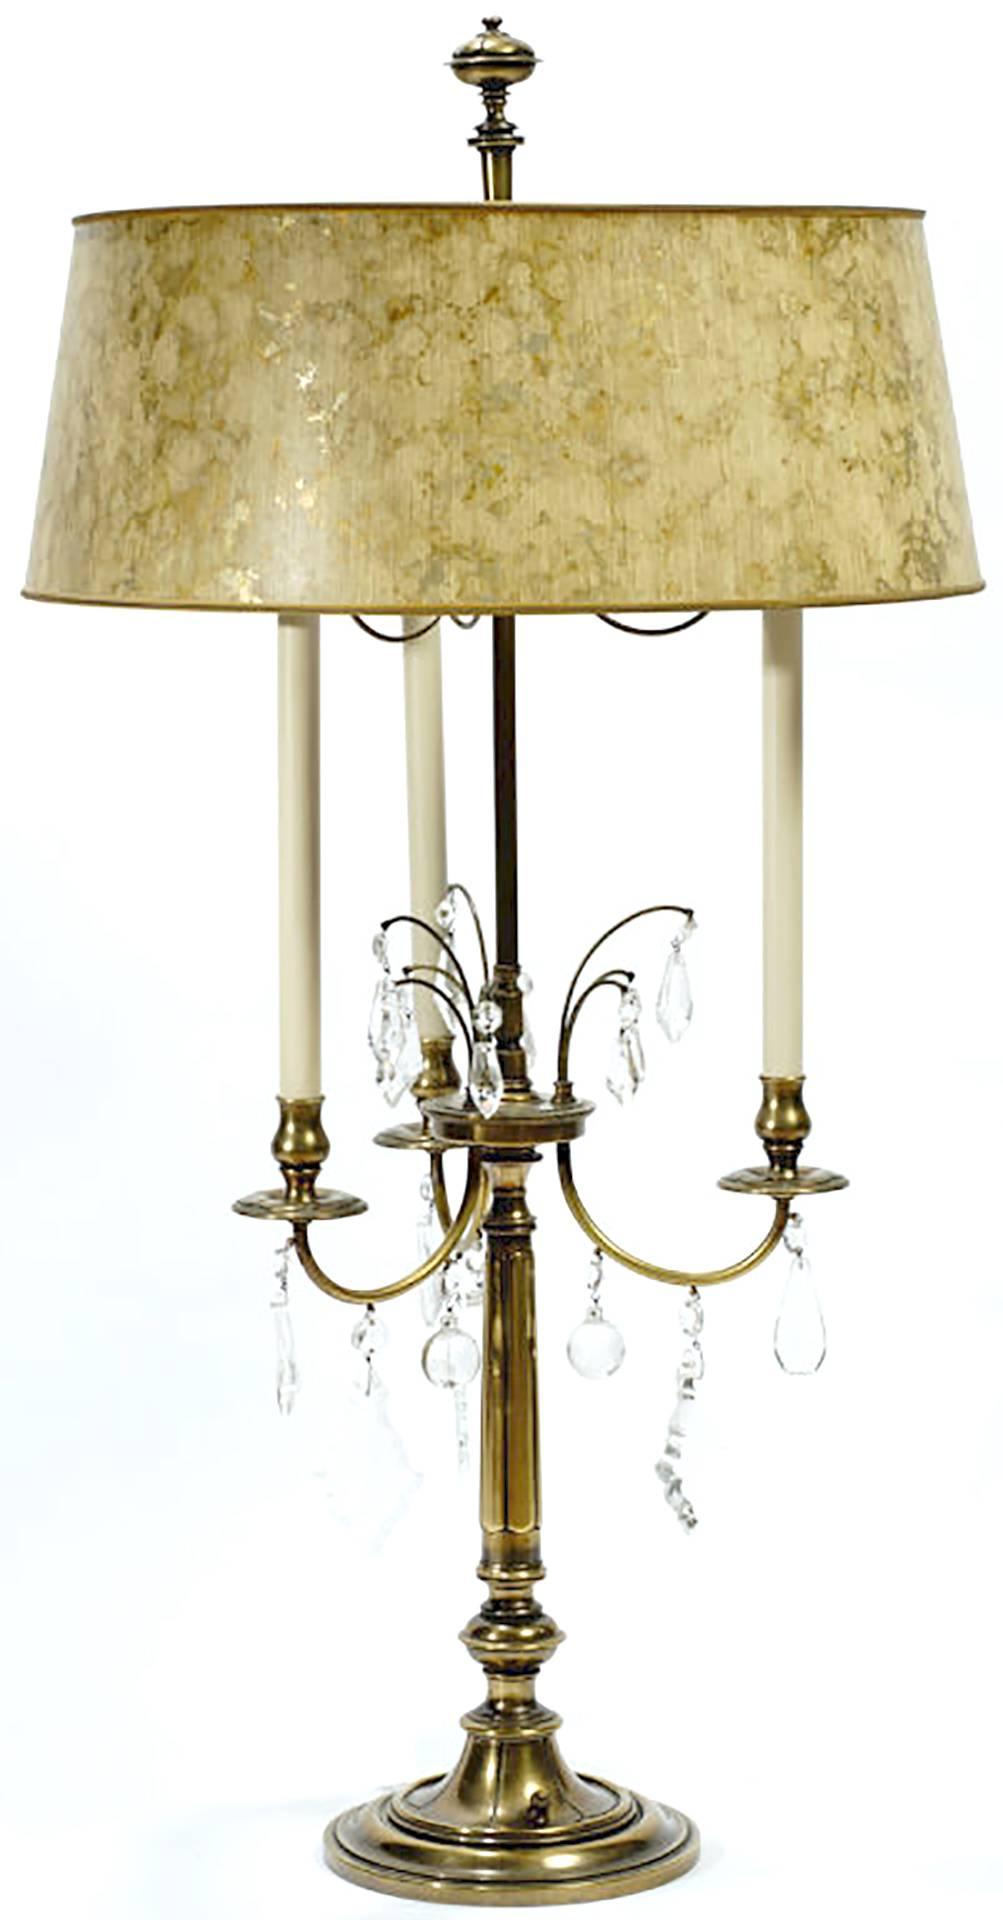 In excellent original condition, these sizable three-arm lamps are made of brass, with hanging crystals. With original cream and gold tortoiseshell shades, and stately finials.